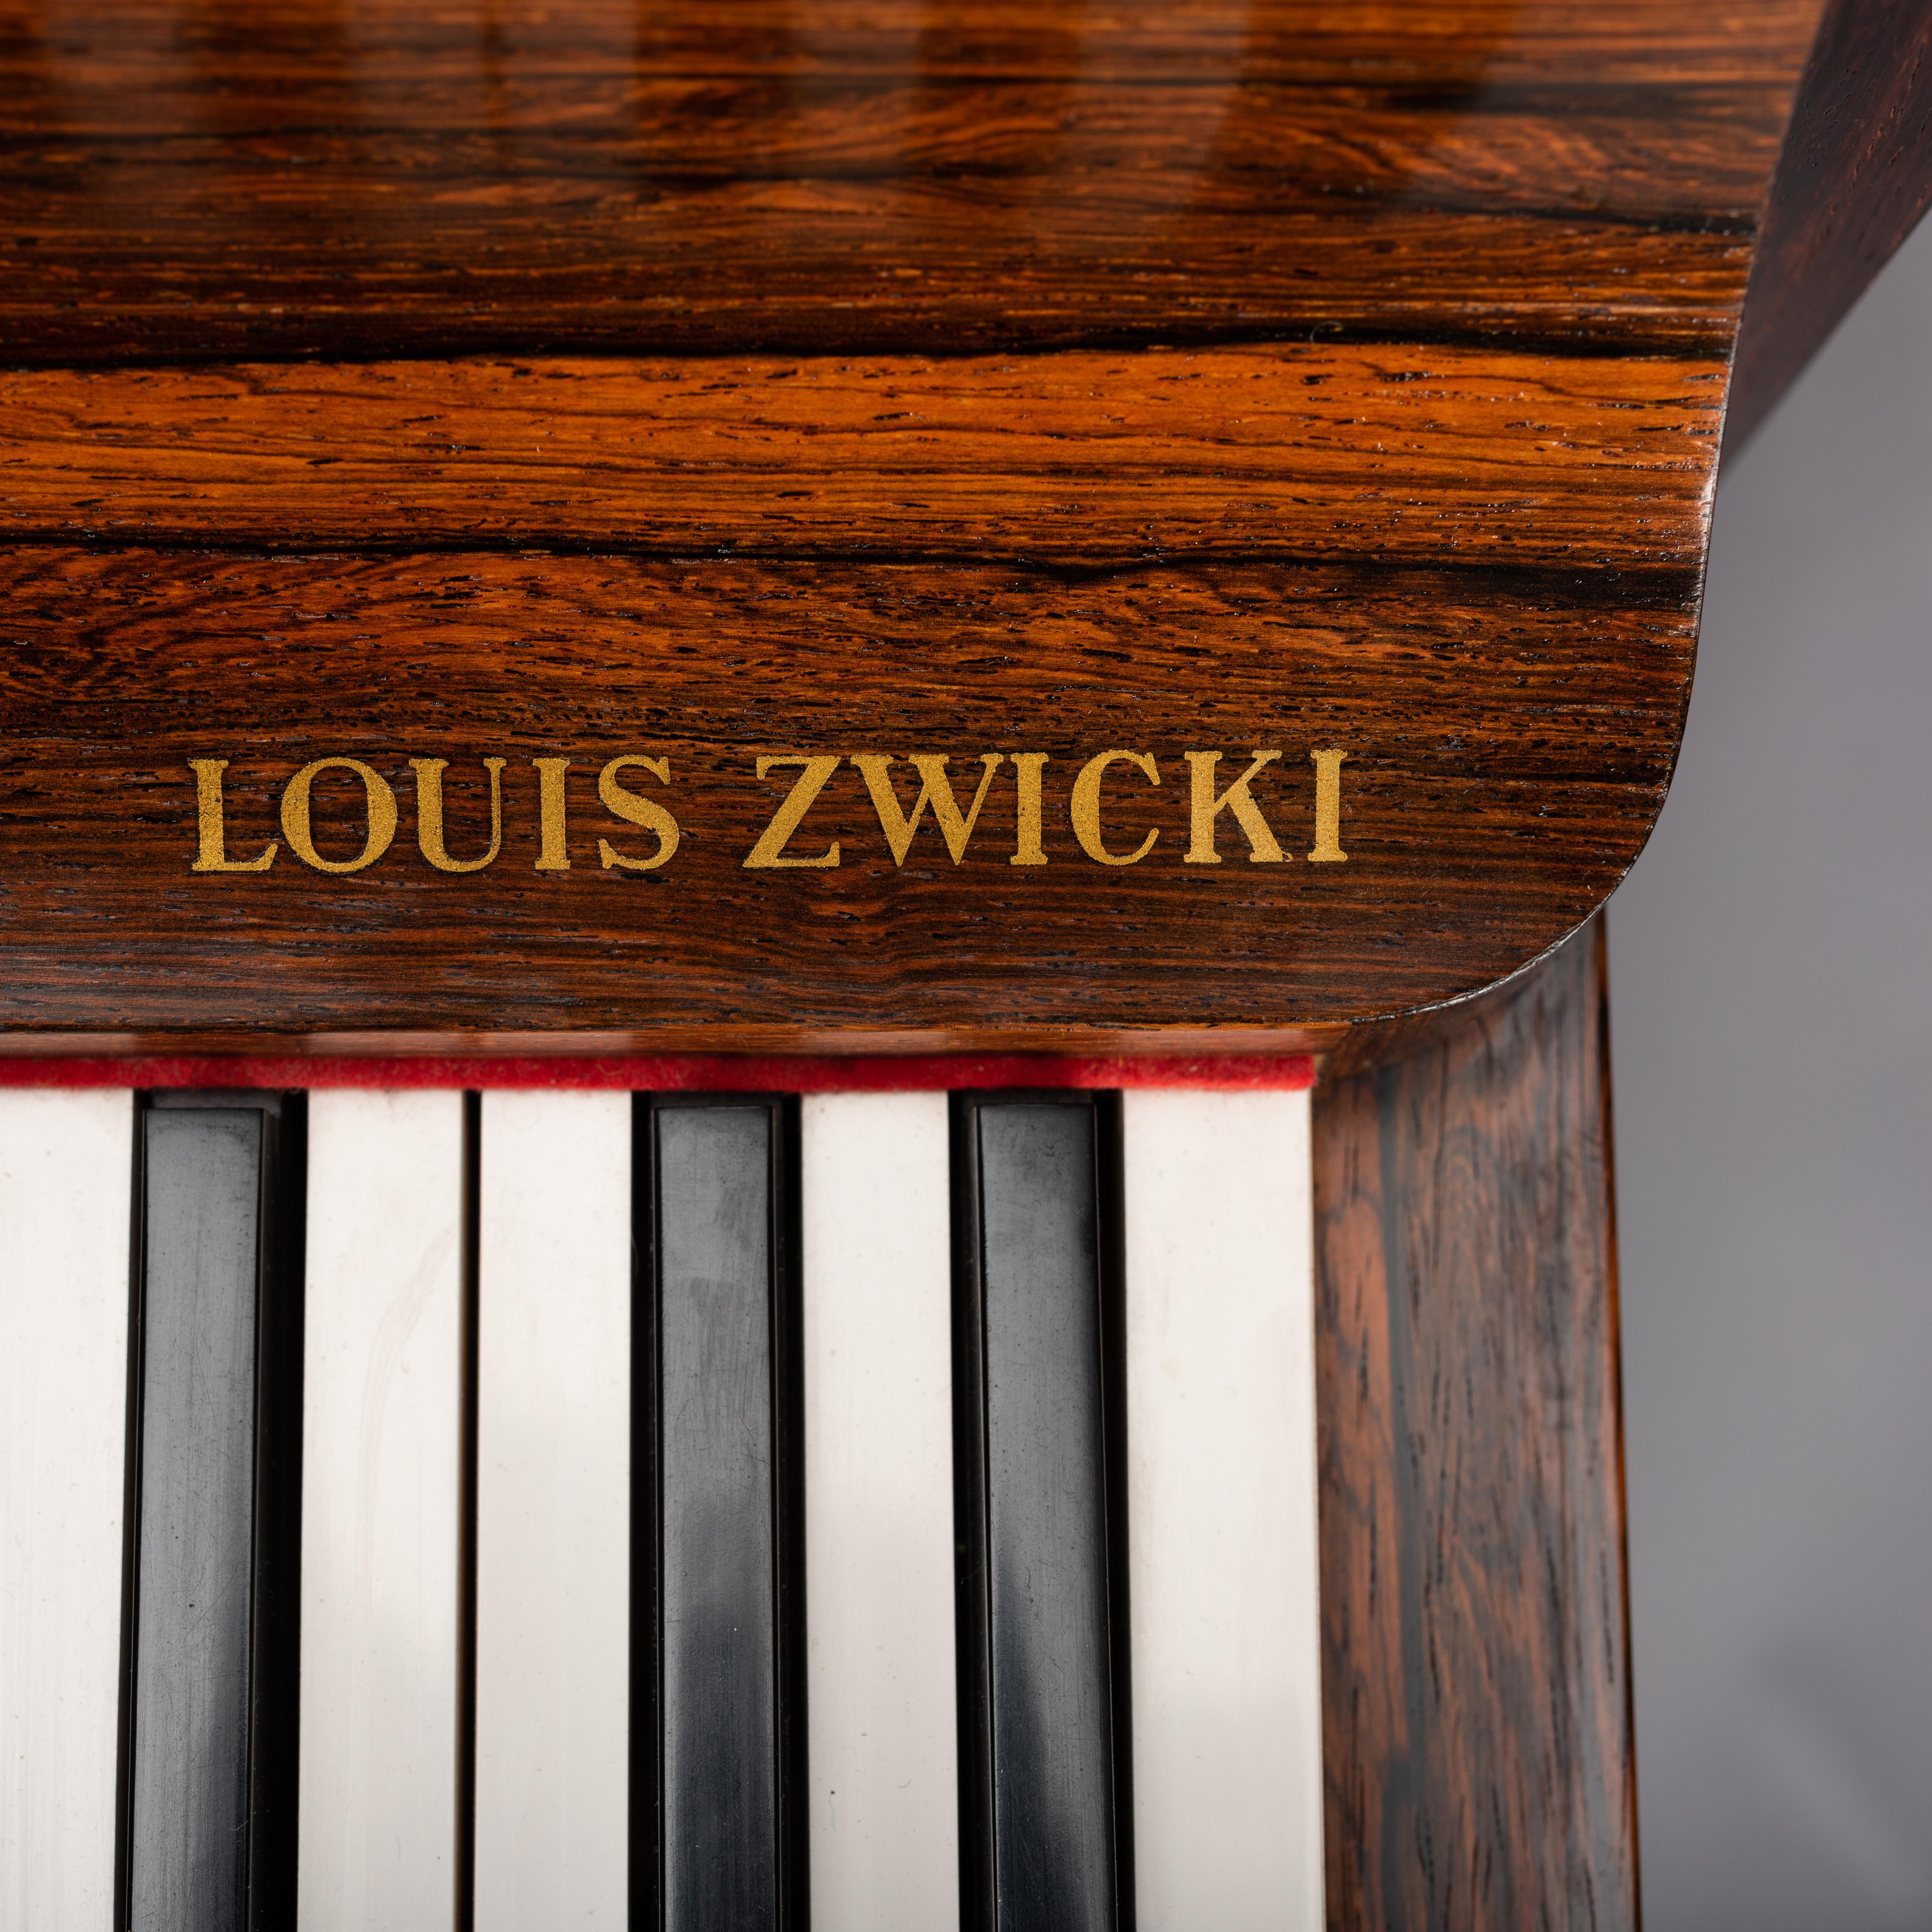 Danish Midcentury Pianette by Louis Zwicki in Expressive Rosewood, 1950s 3